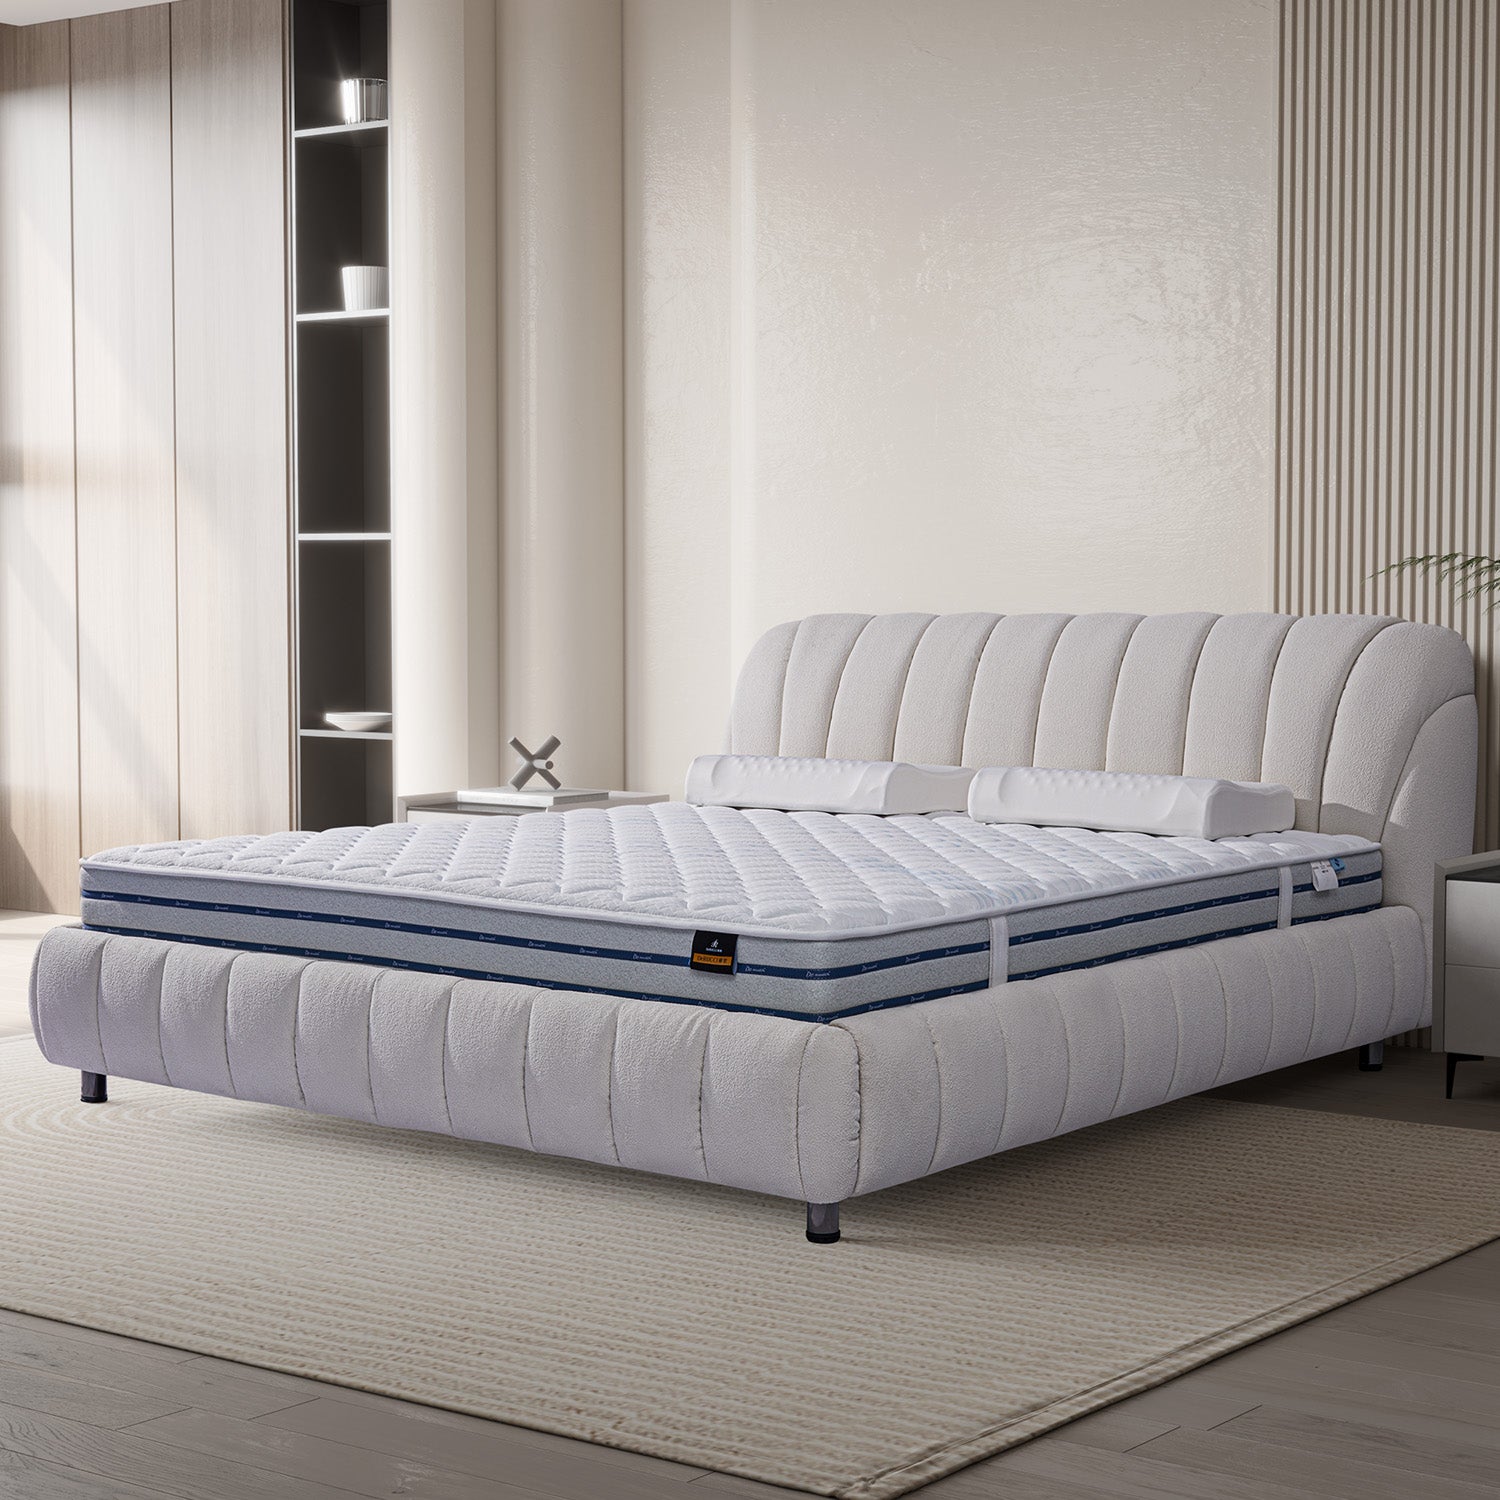 DeRUCCI BOC1 - 015 bed frame upholstered in white fabric with padded, tufted headboard, showcasing modern bedroom setup with beige rug and shelving unit.